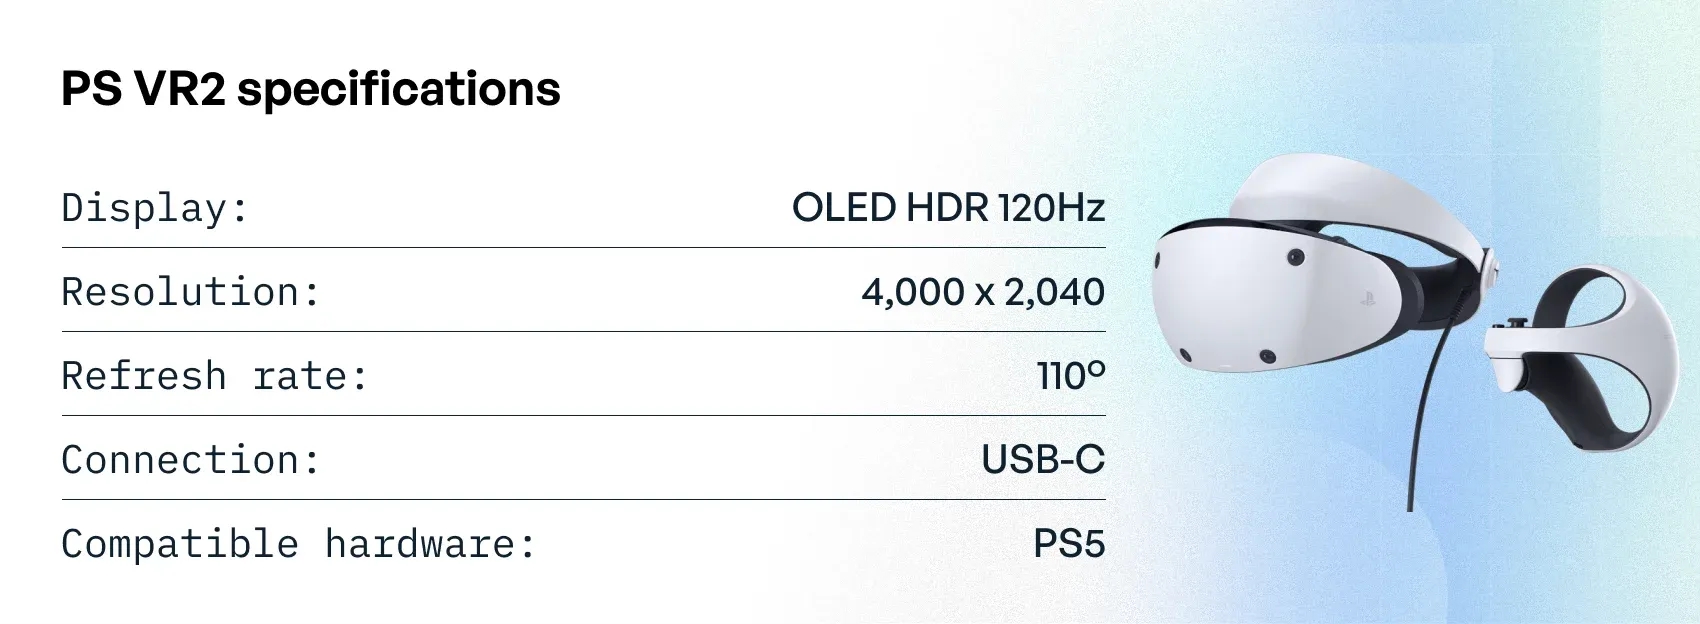 PS VR2 specifications